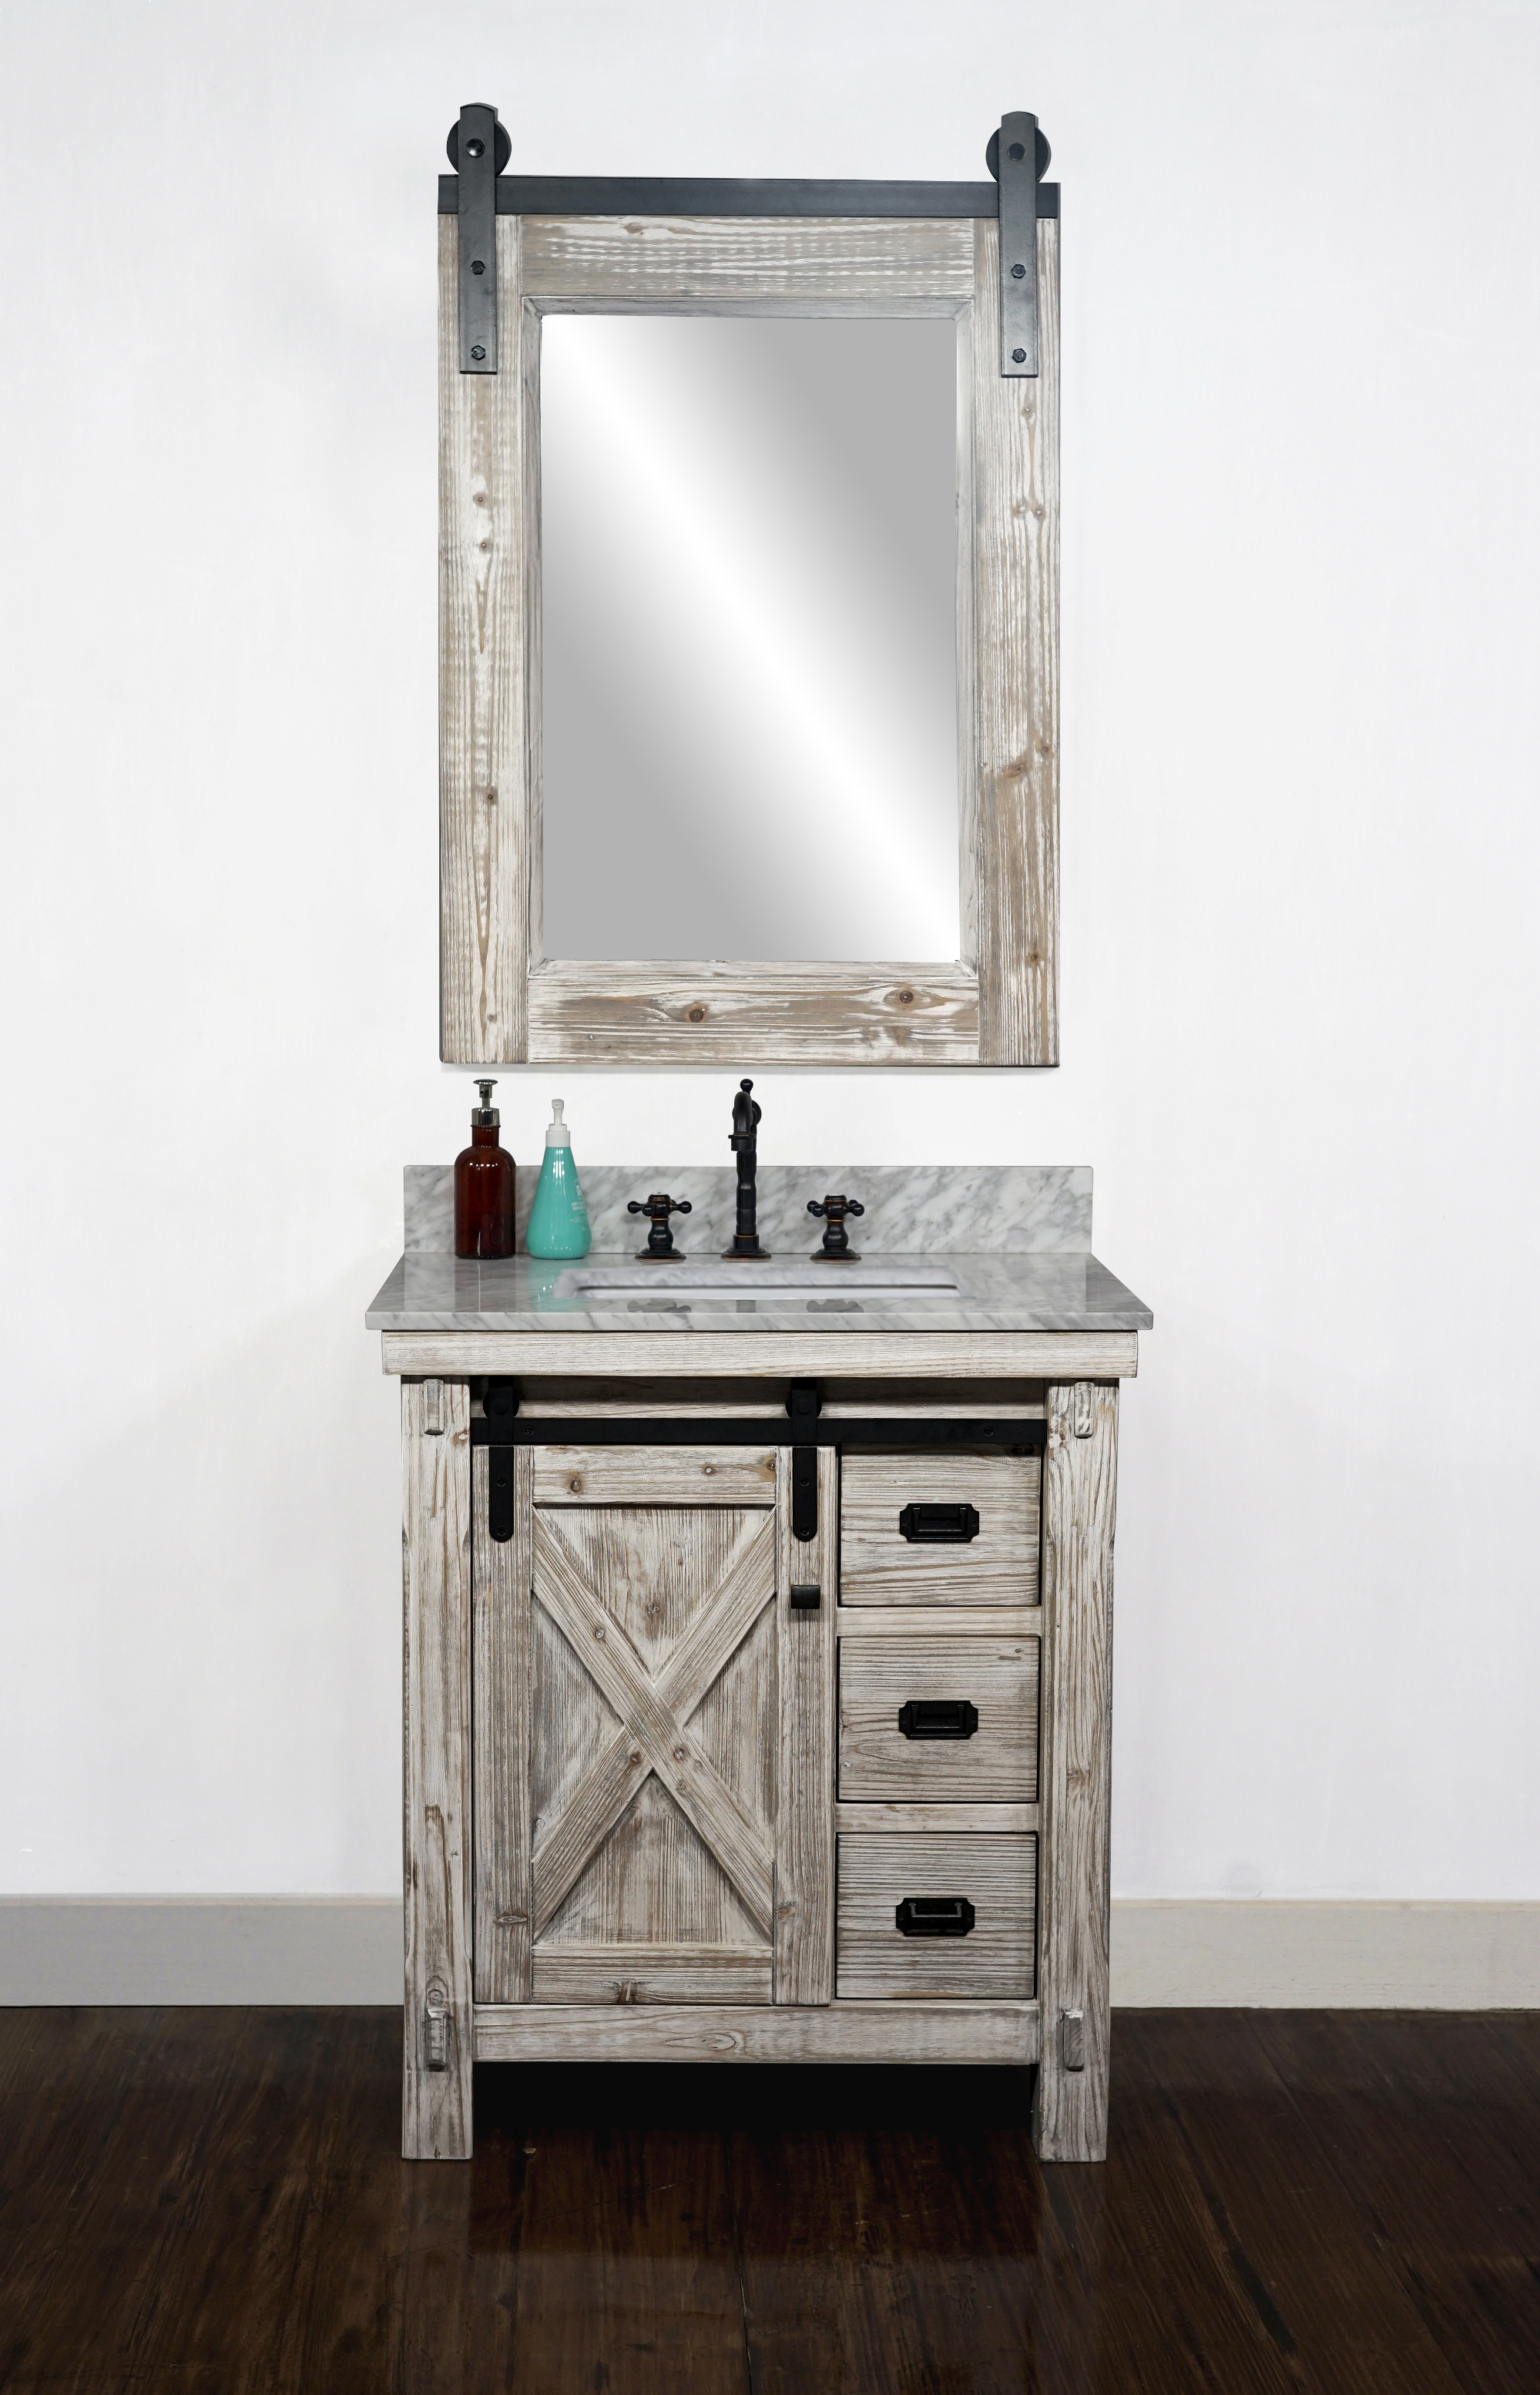 30" Rustic Solid Fir Barn Door Style Single Sink Vanity in White Washed